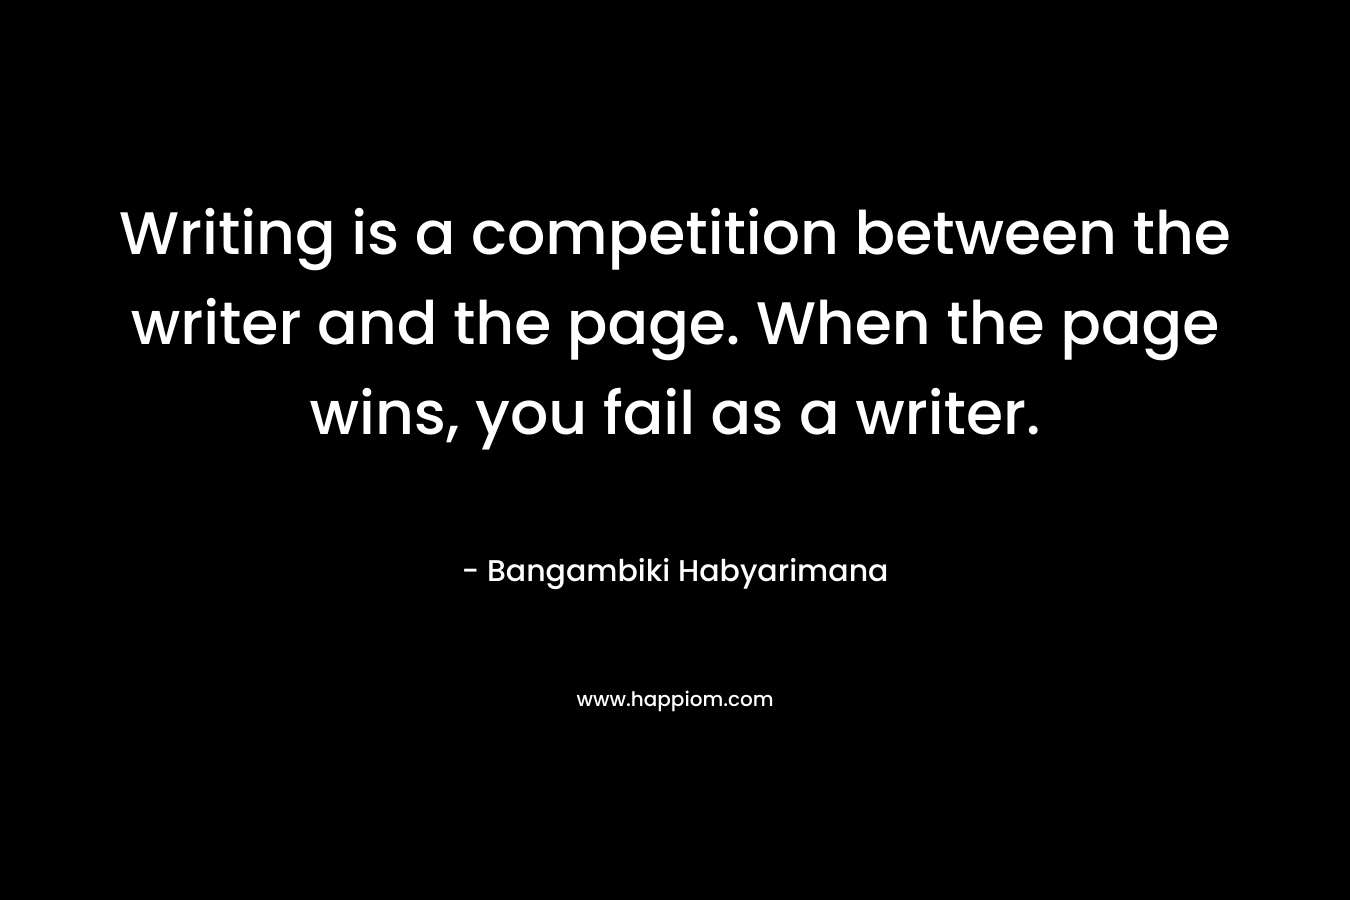 Writing is a competition between the writer and the page. When the page wins, you fail as a writer.